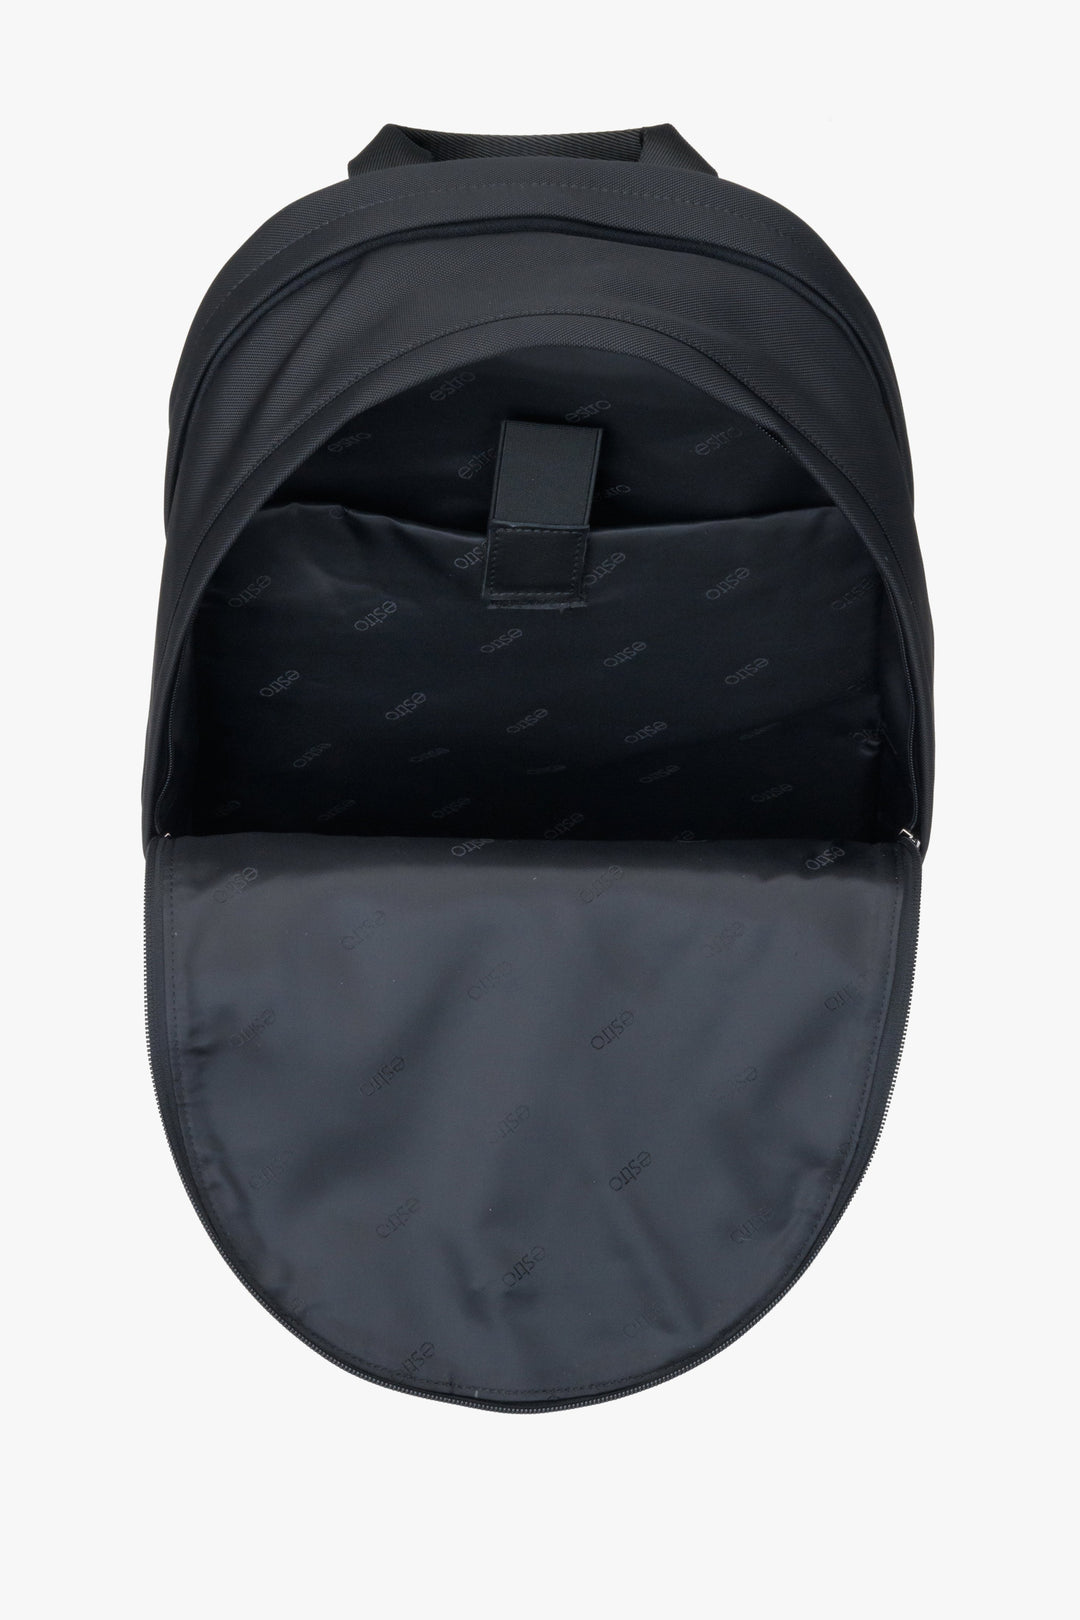 Spacious men's black  backpack Estro - close-up on the large compartments of the backpack.